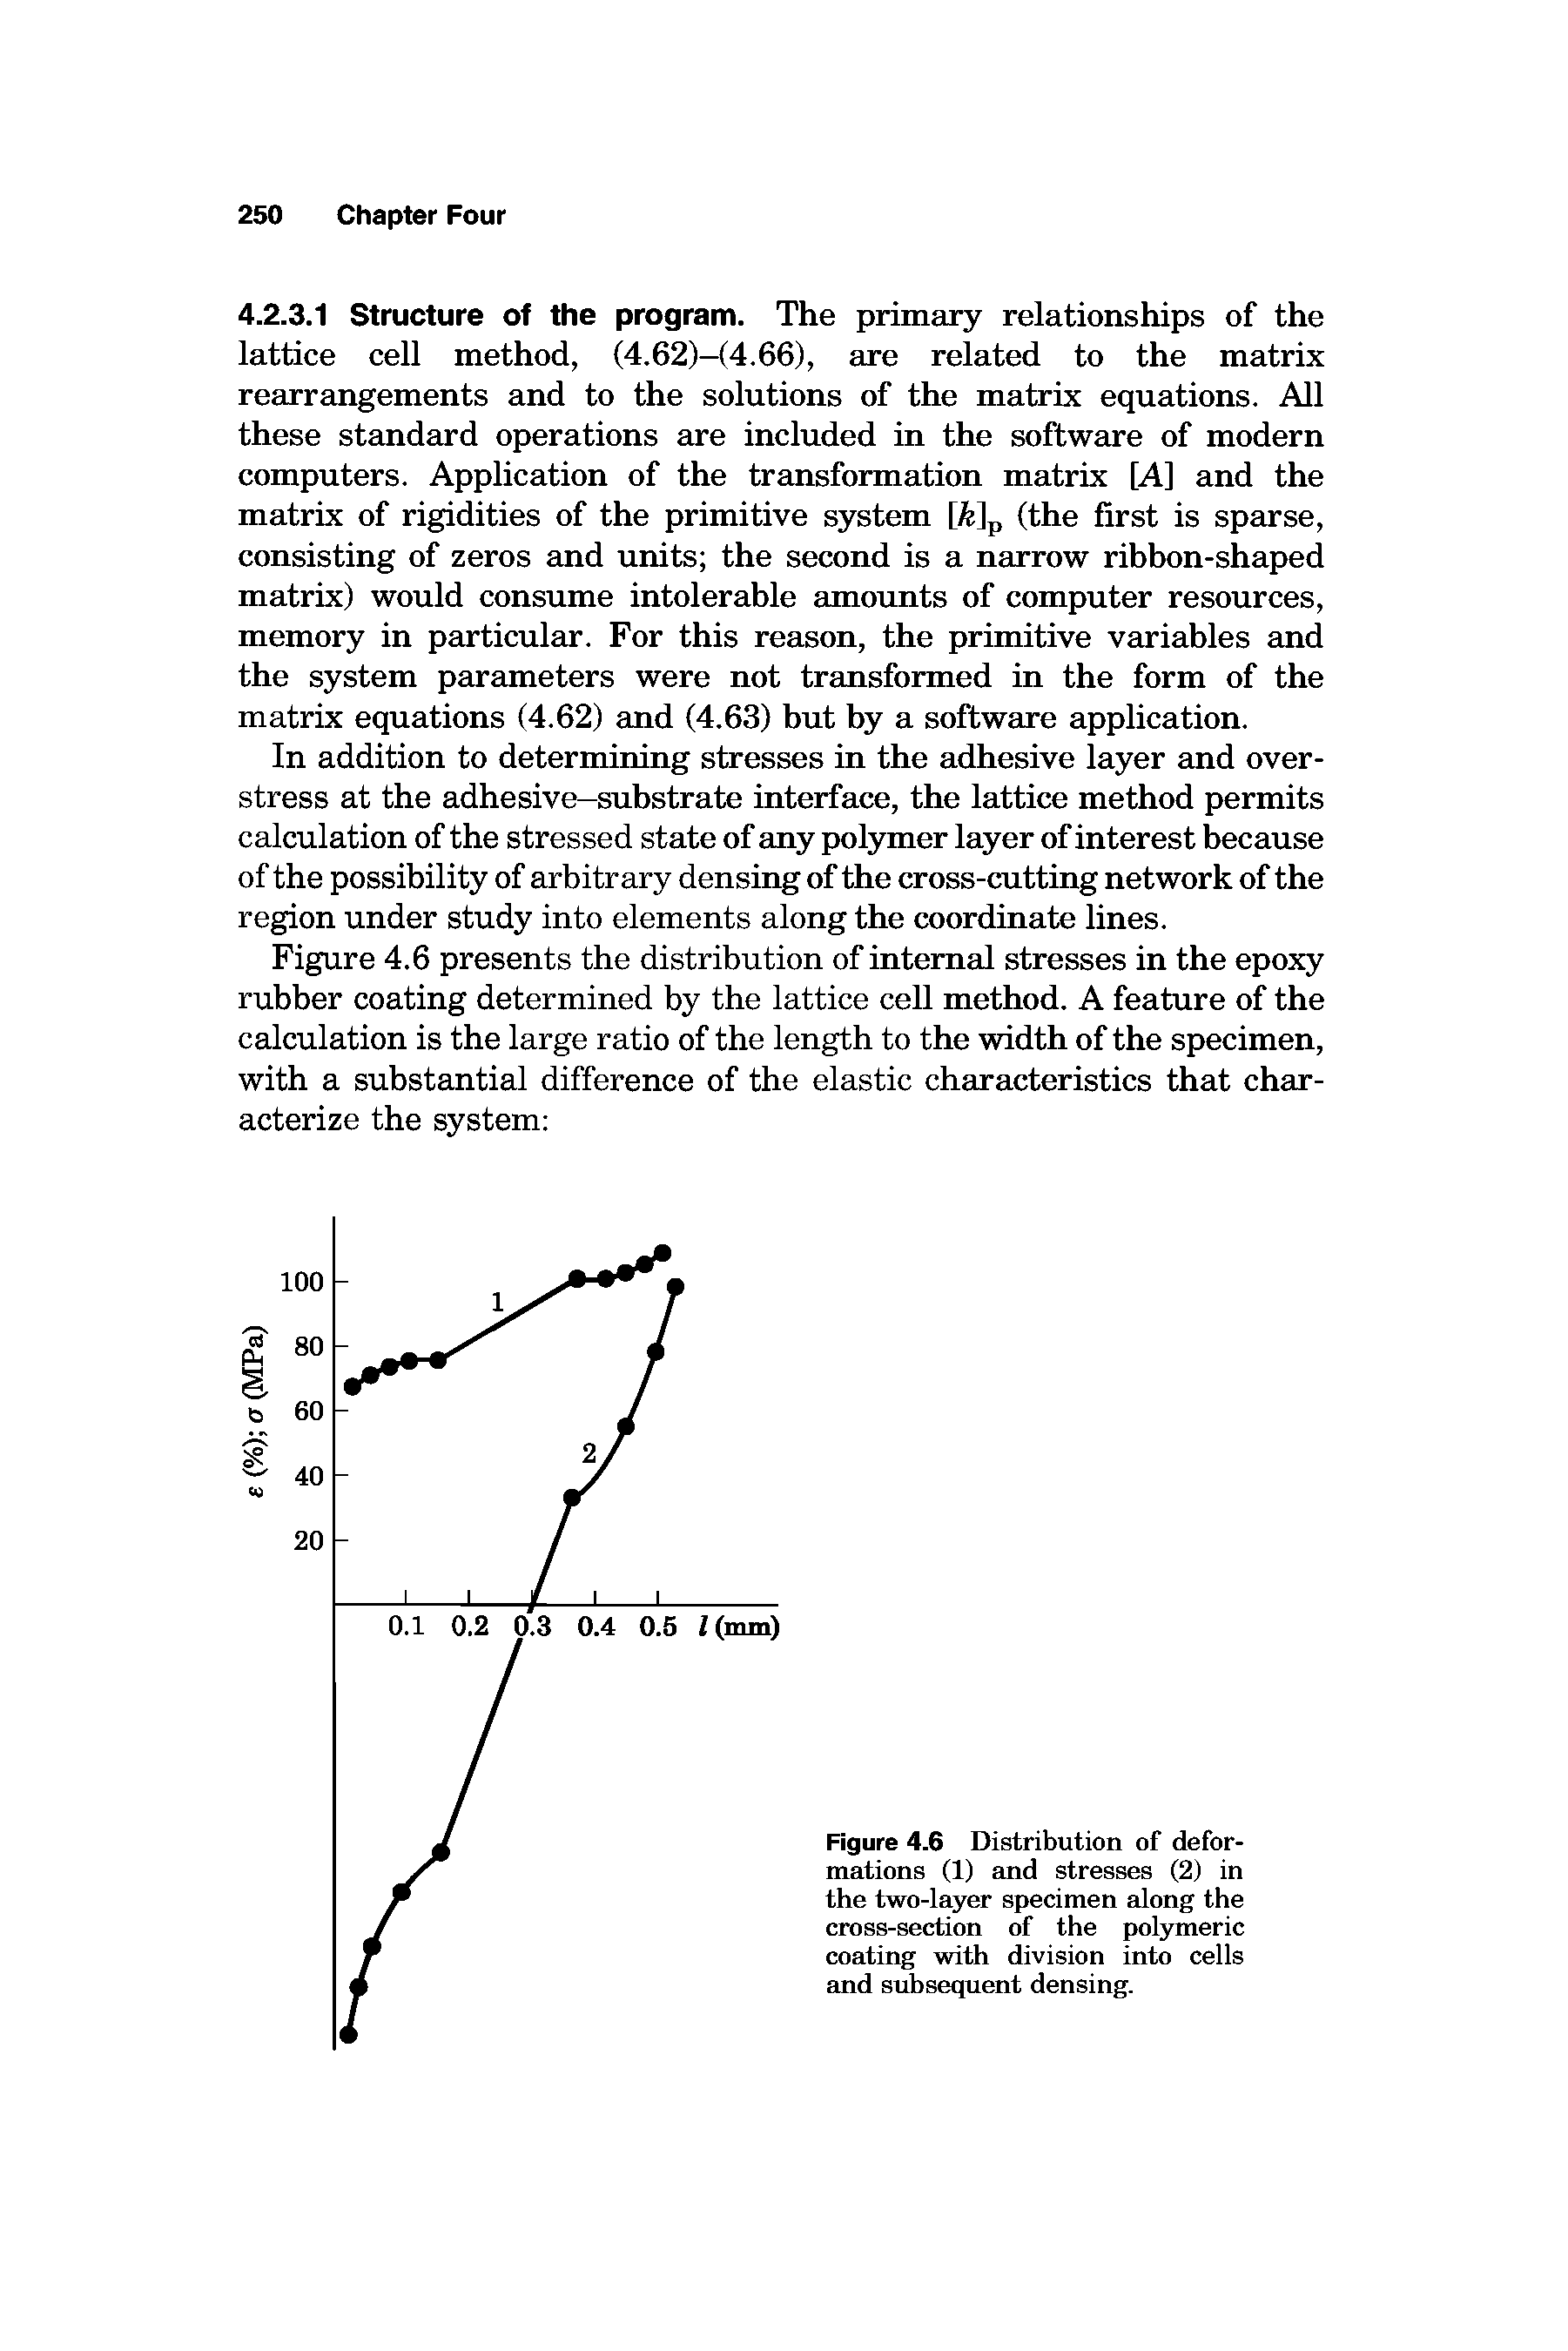 Figure 4.6 presents the distribution of internal stresses in the epoxy rubber coating determined by the lattice cell method. A feature of the calculation is the large ratio of the length to the width of the specimen, with a substantial difference of the elastic characteristics that characterize the system ...